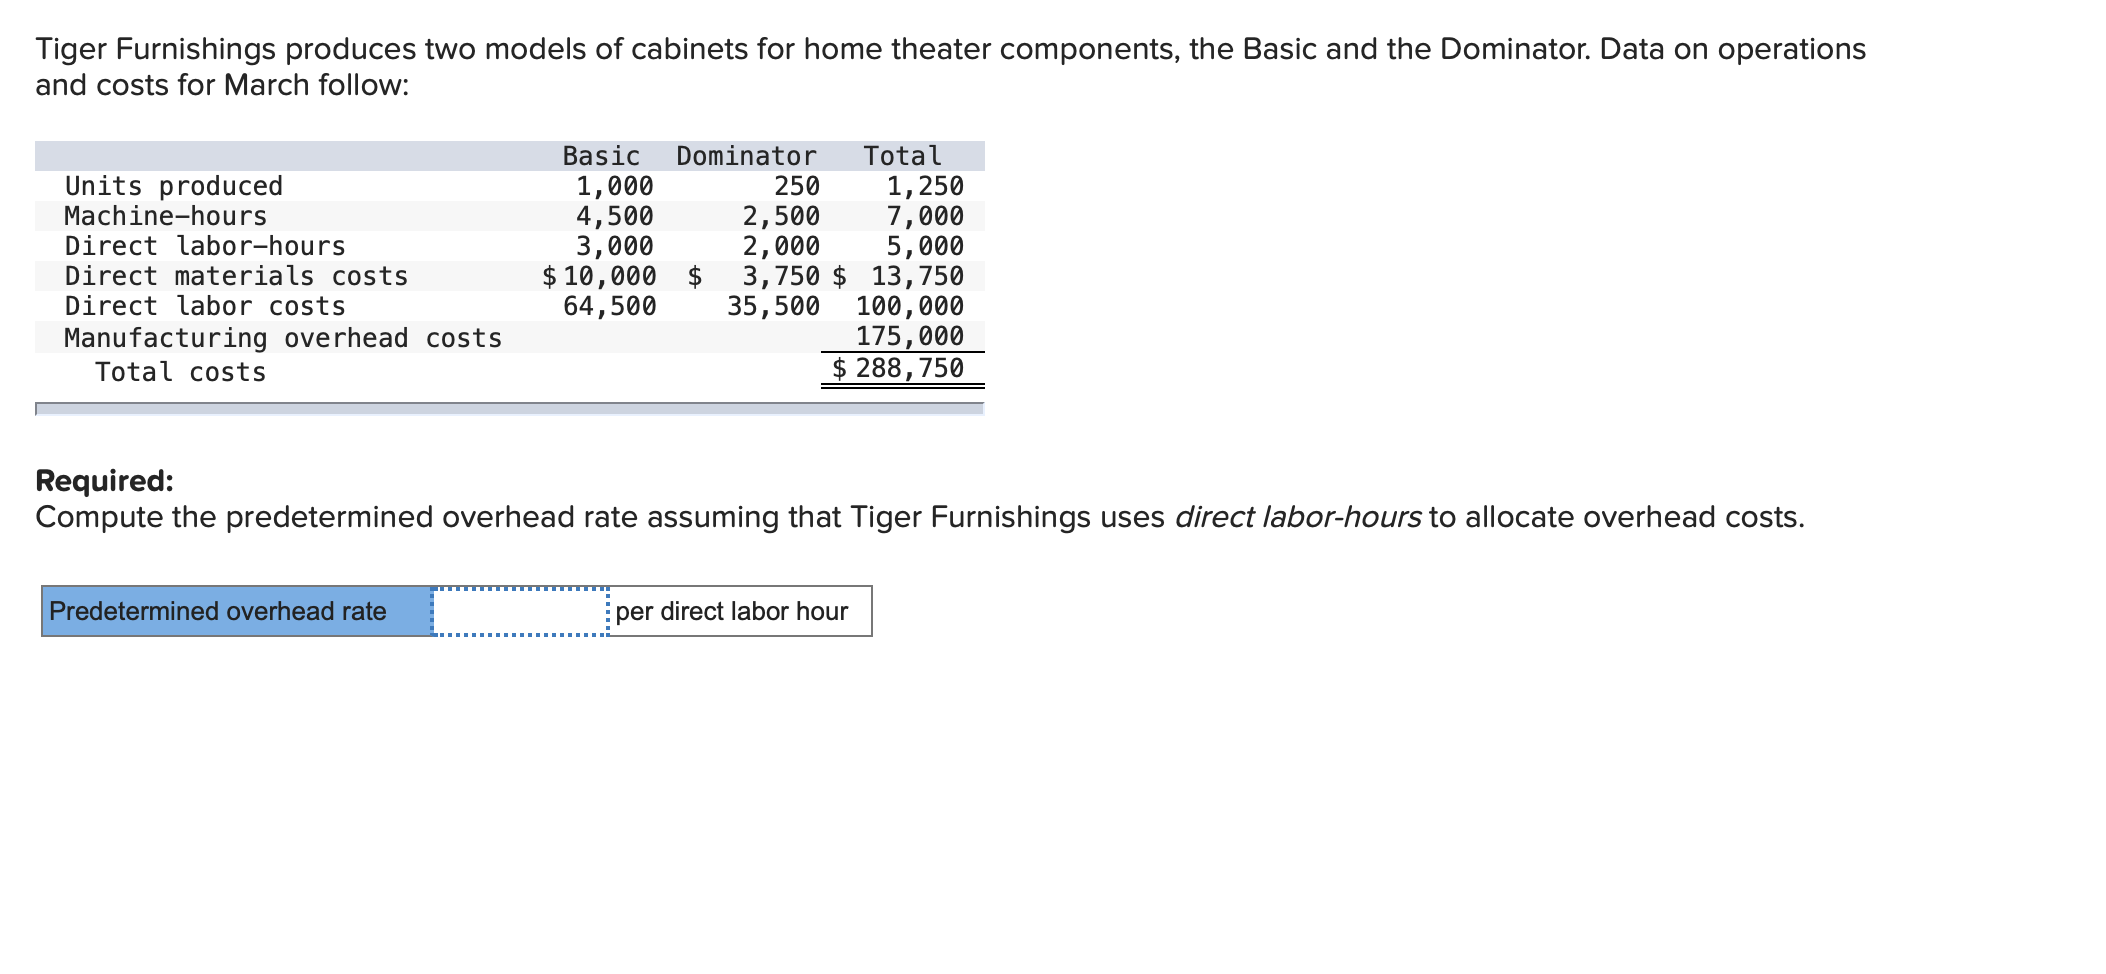 Tiger Furnishings produces two models of cabinets for home theater components, the Basic and the Dominator. Data on operations
and costs for March follow:
Basic
Dominator
Total
Units produced
Machine-hours
Direct labor-hours
Direct materials costs
Direct labor costs
1,000
4,500
3,000
$ 10,000 $
64,500
1,250
7,000
5,000
3,750 $ 13,750
35,500 100,000
175,000
$ 288,750
250
2,500
2,000
Manufacturing overhead costs
Total costs
Required:
Compute the predetermined overhead rate assuming that Tiger Furnishings uses direct labor-hours to allocate overhead costs.
